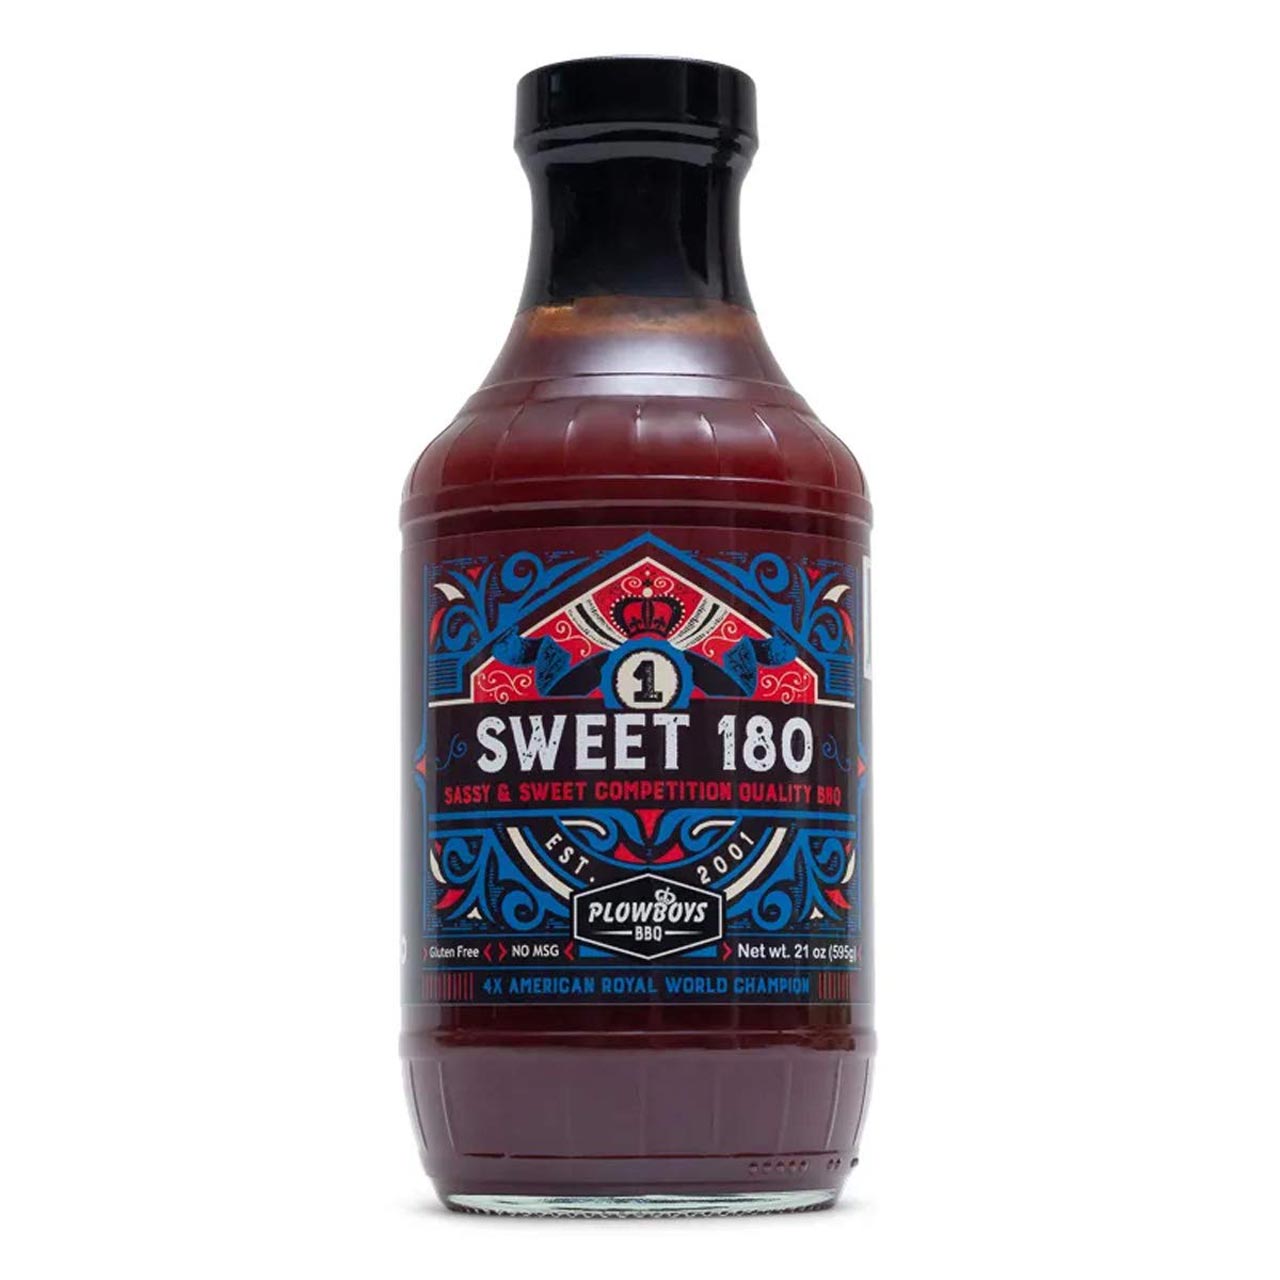 Plowboys Barbecue - Sweet 180 Sauce, 624 g